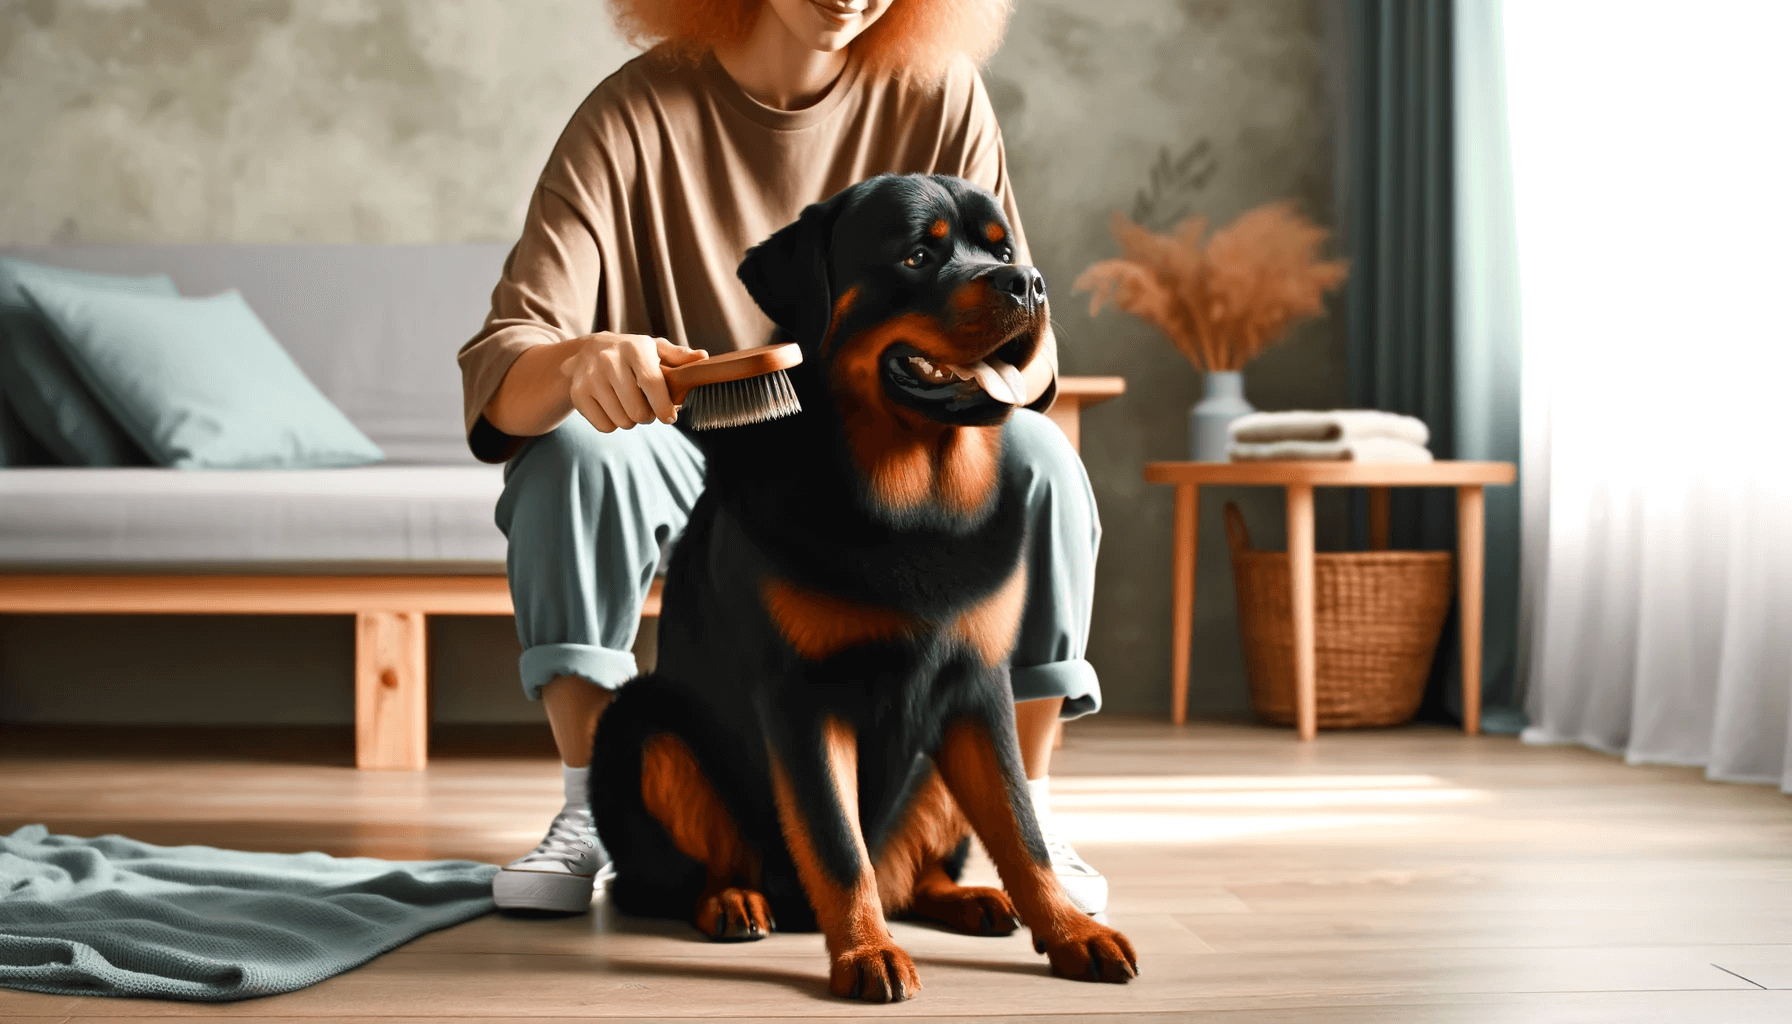 Red Rottweiler being groomed by its owner in a home environment.